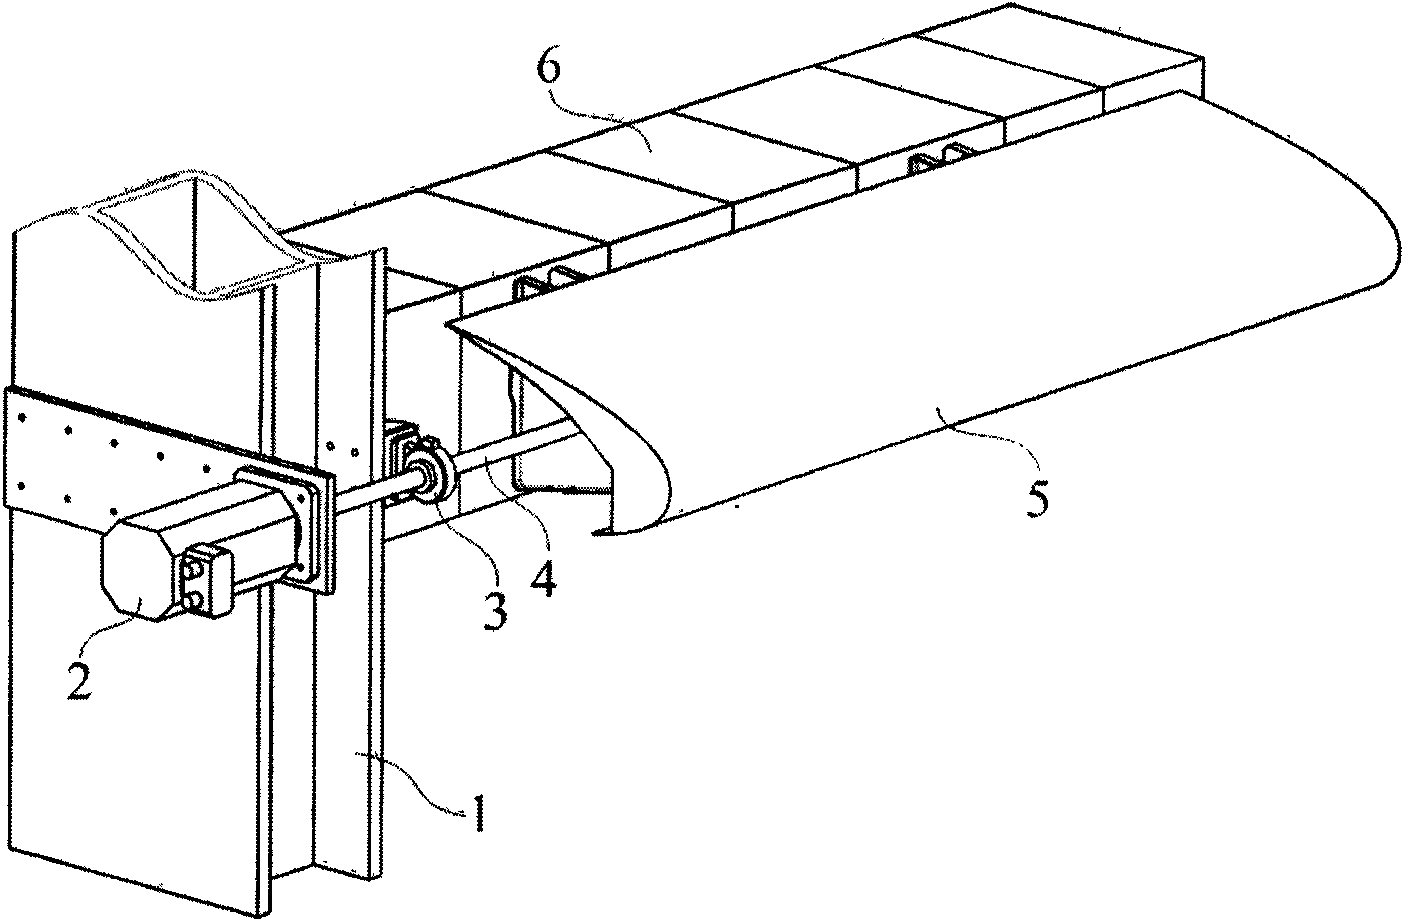 Load follow-up loading system for plane flap reliability test